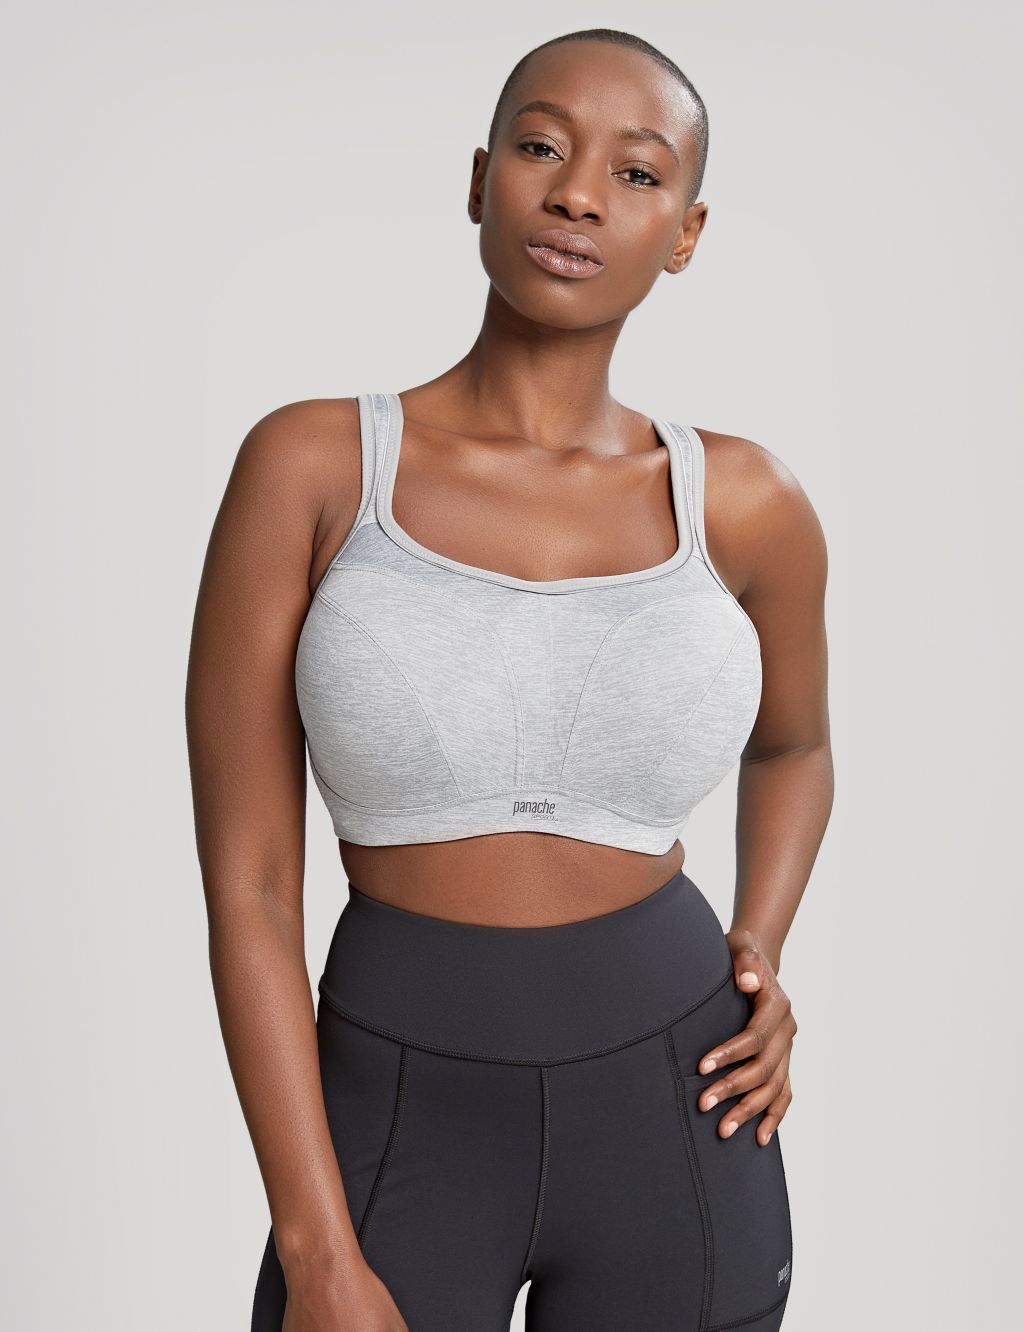 Ultimate Support Wired Sports Bra D-J